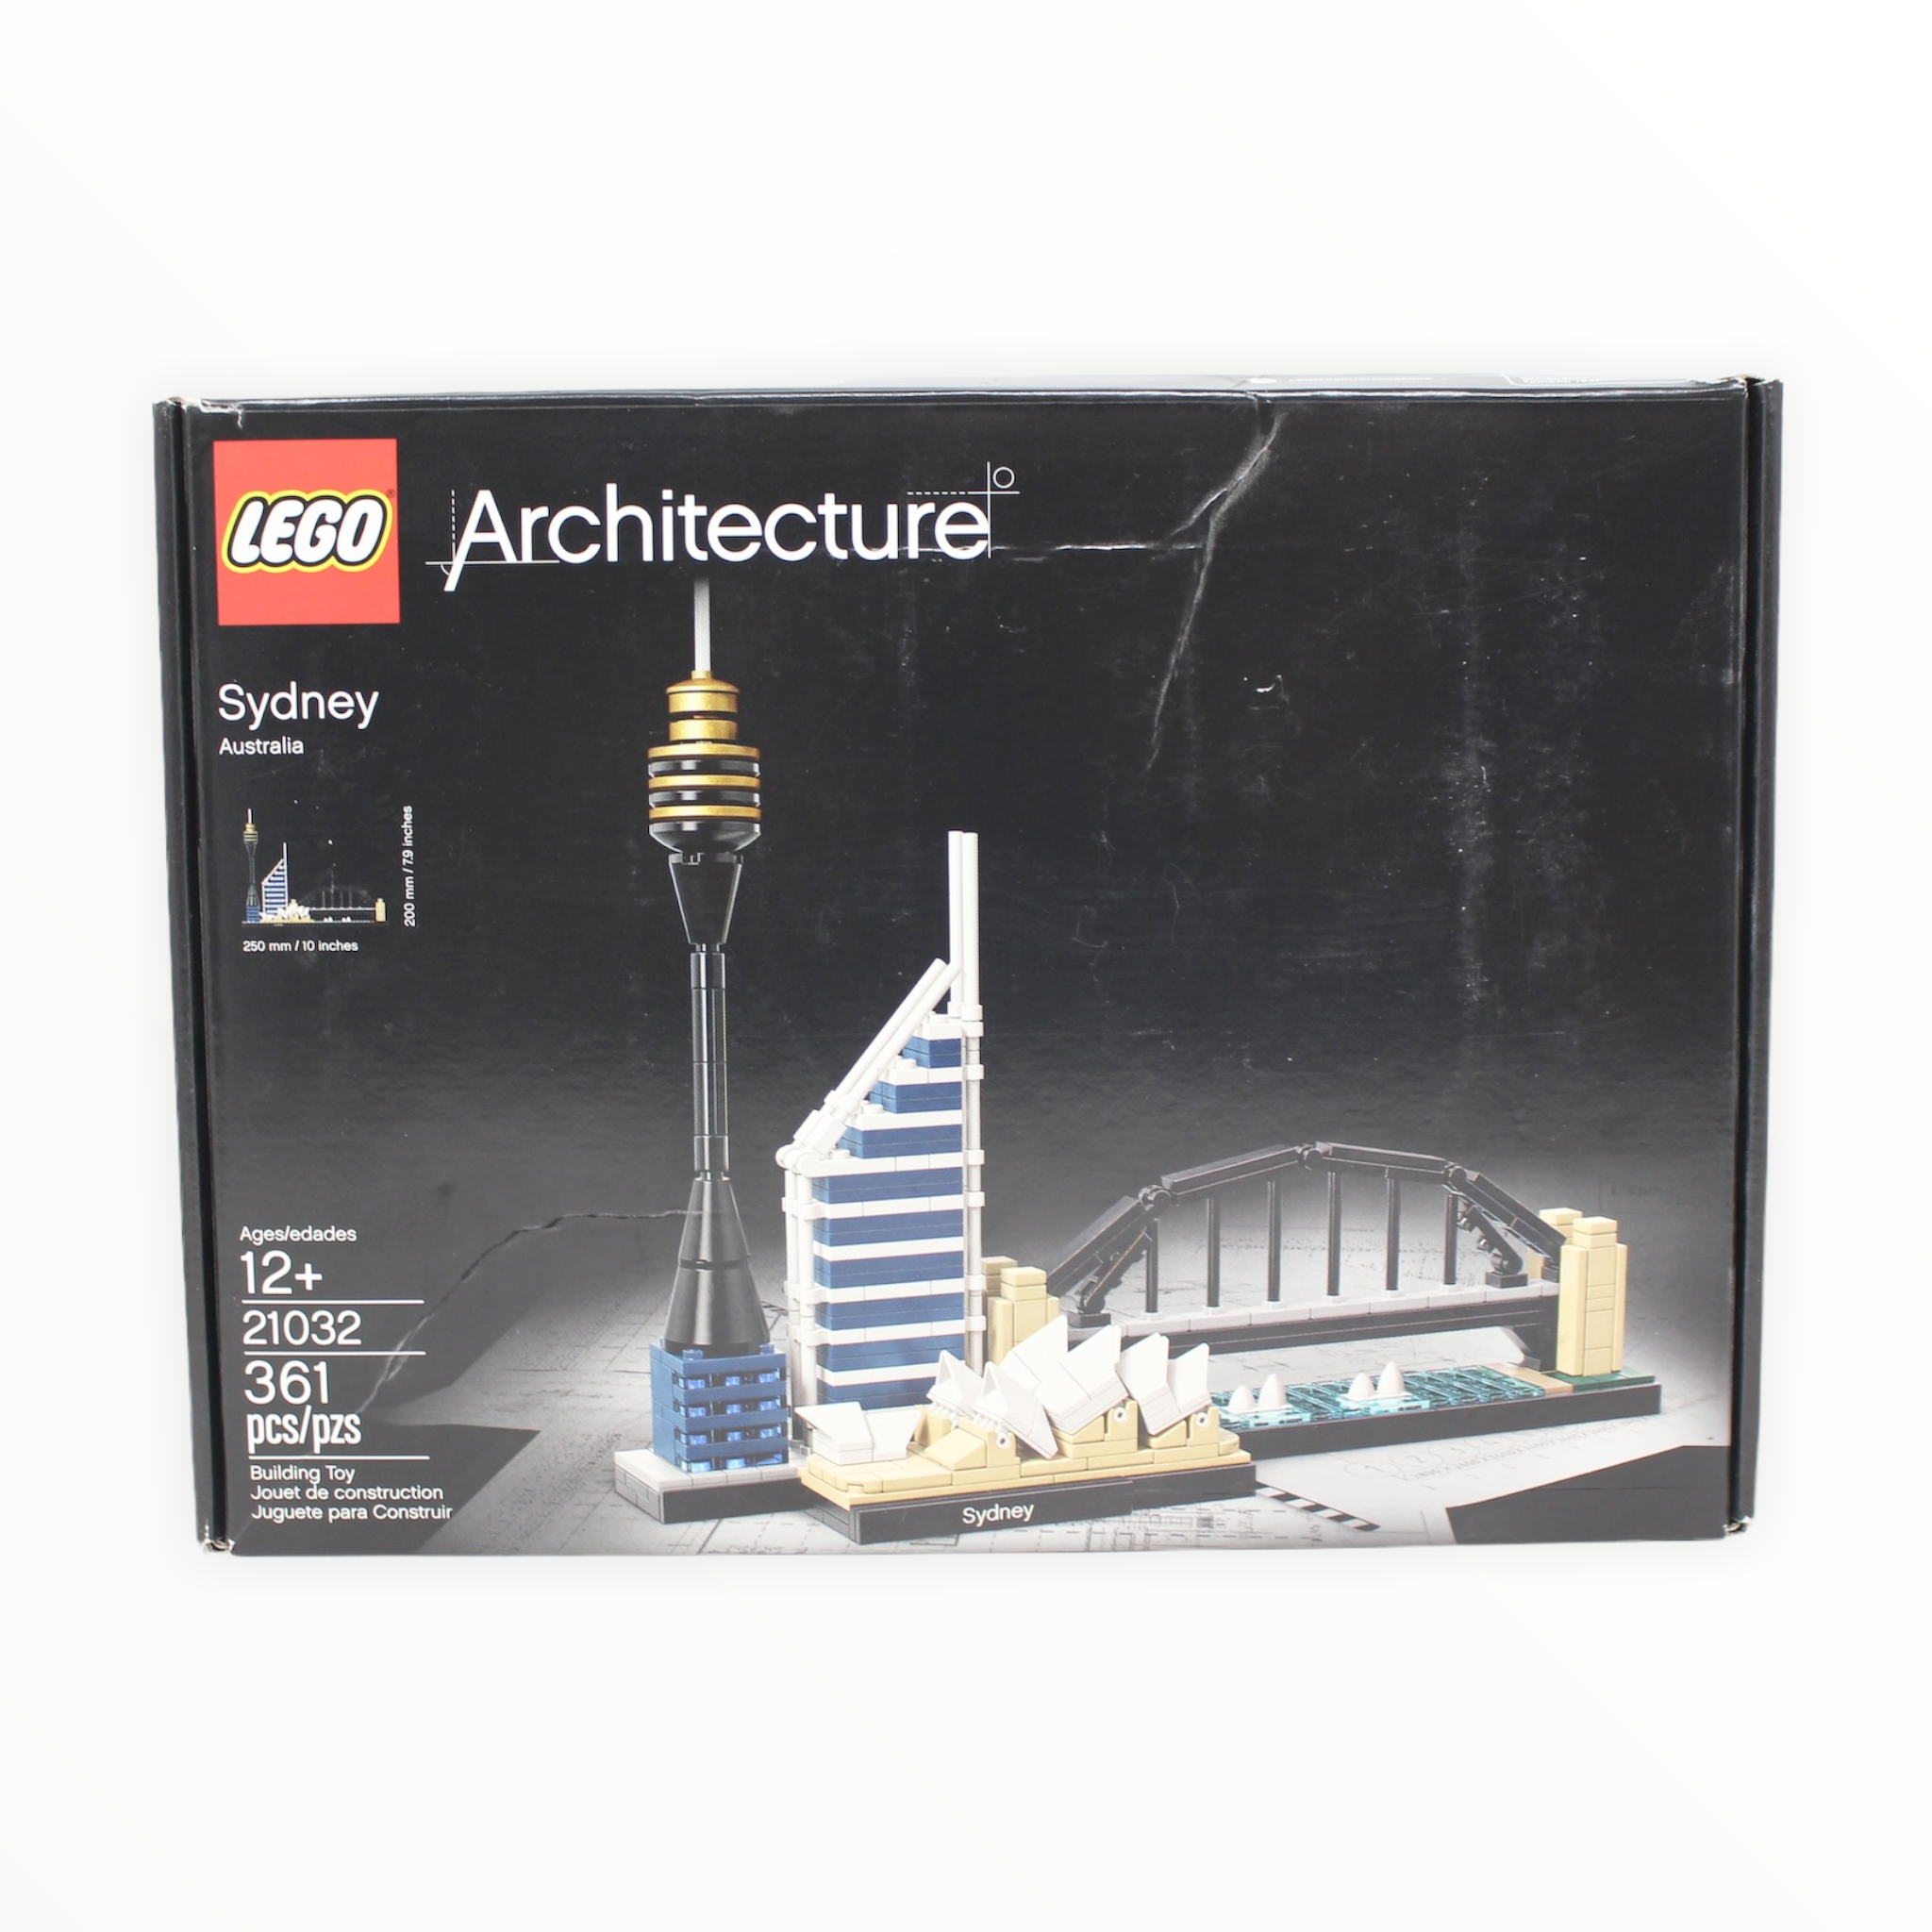 Certified Used Set 21032 Architecture Sydney